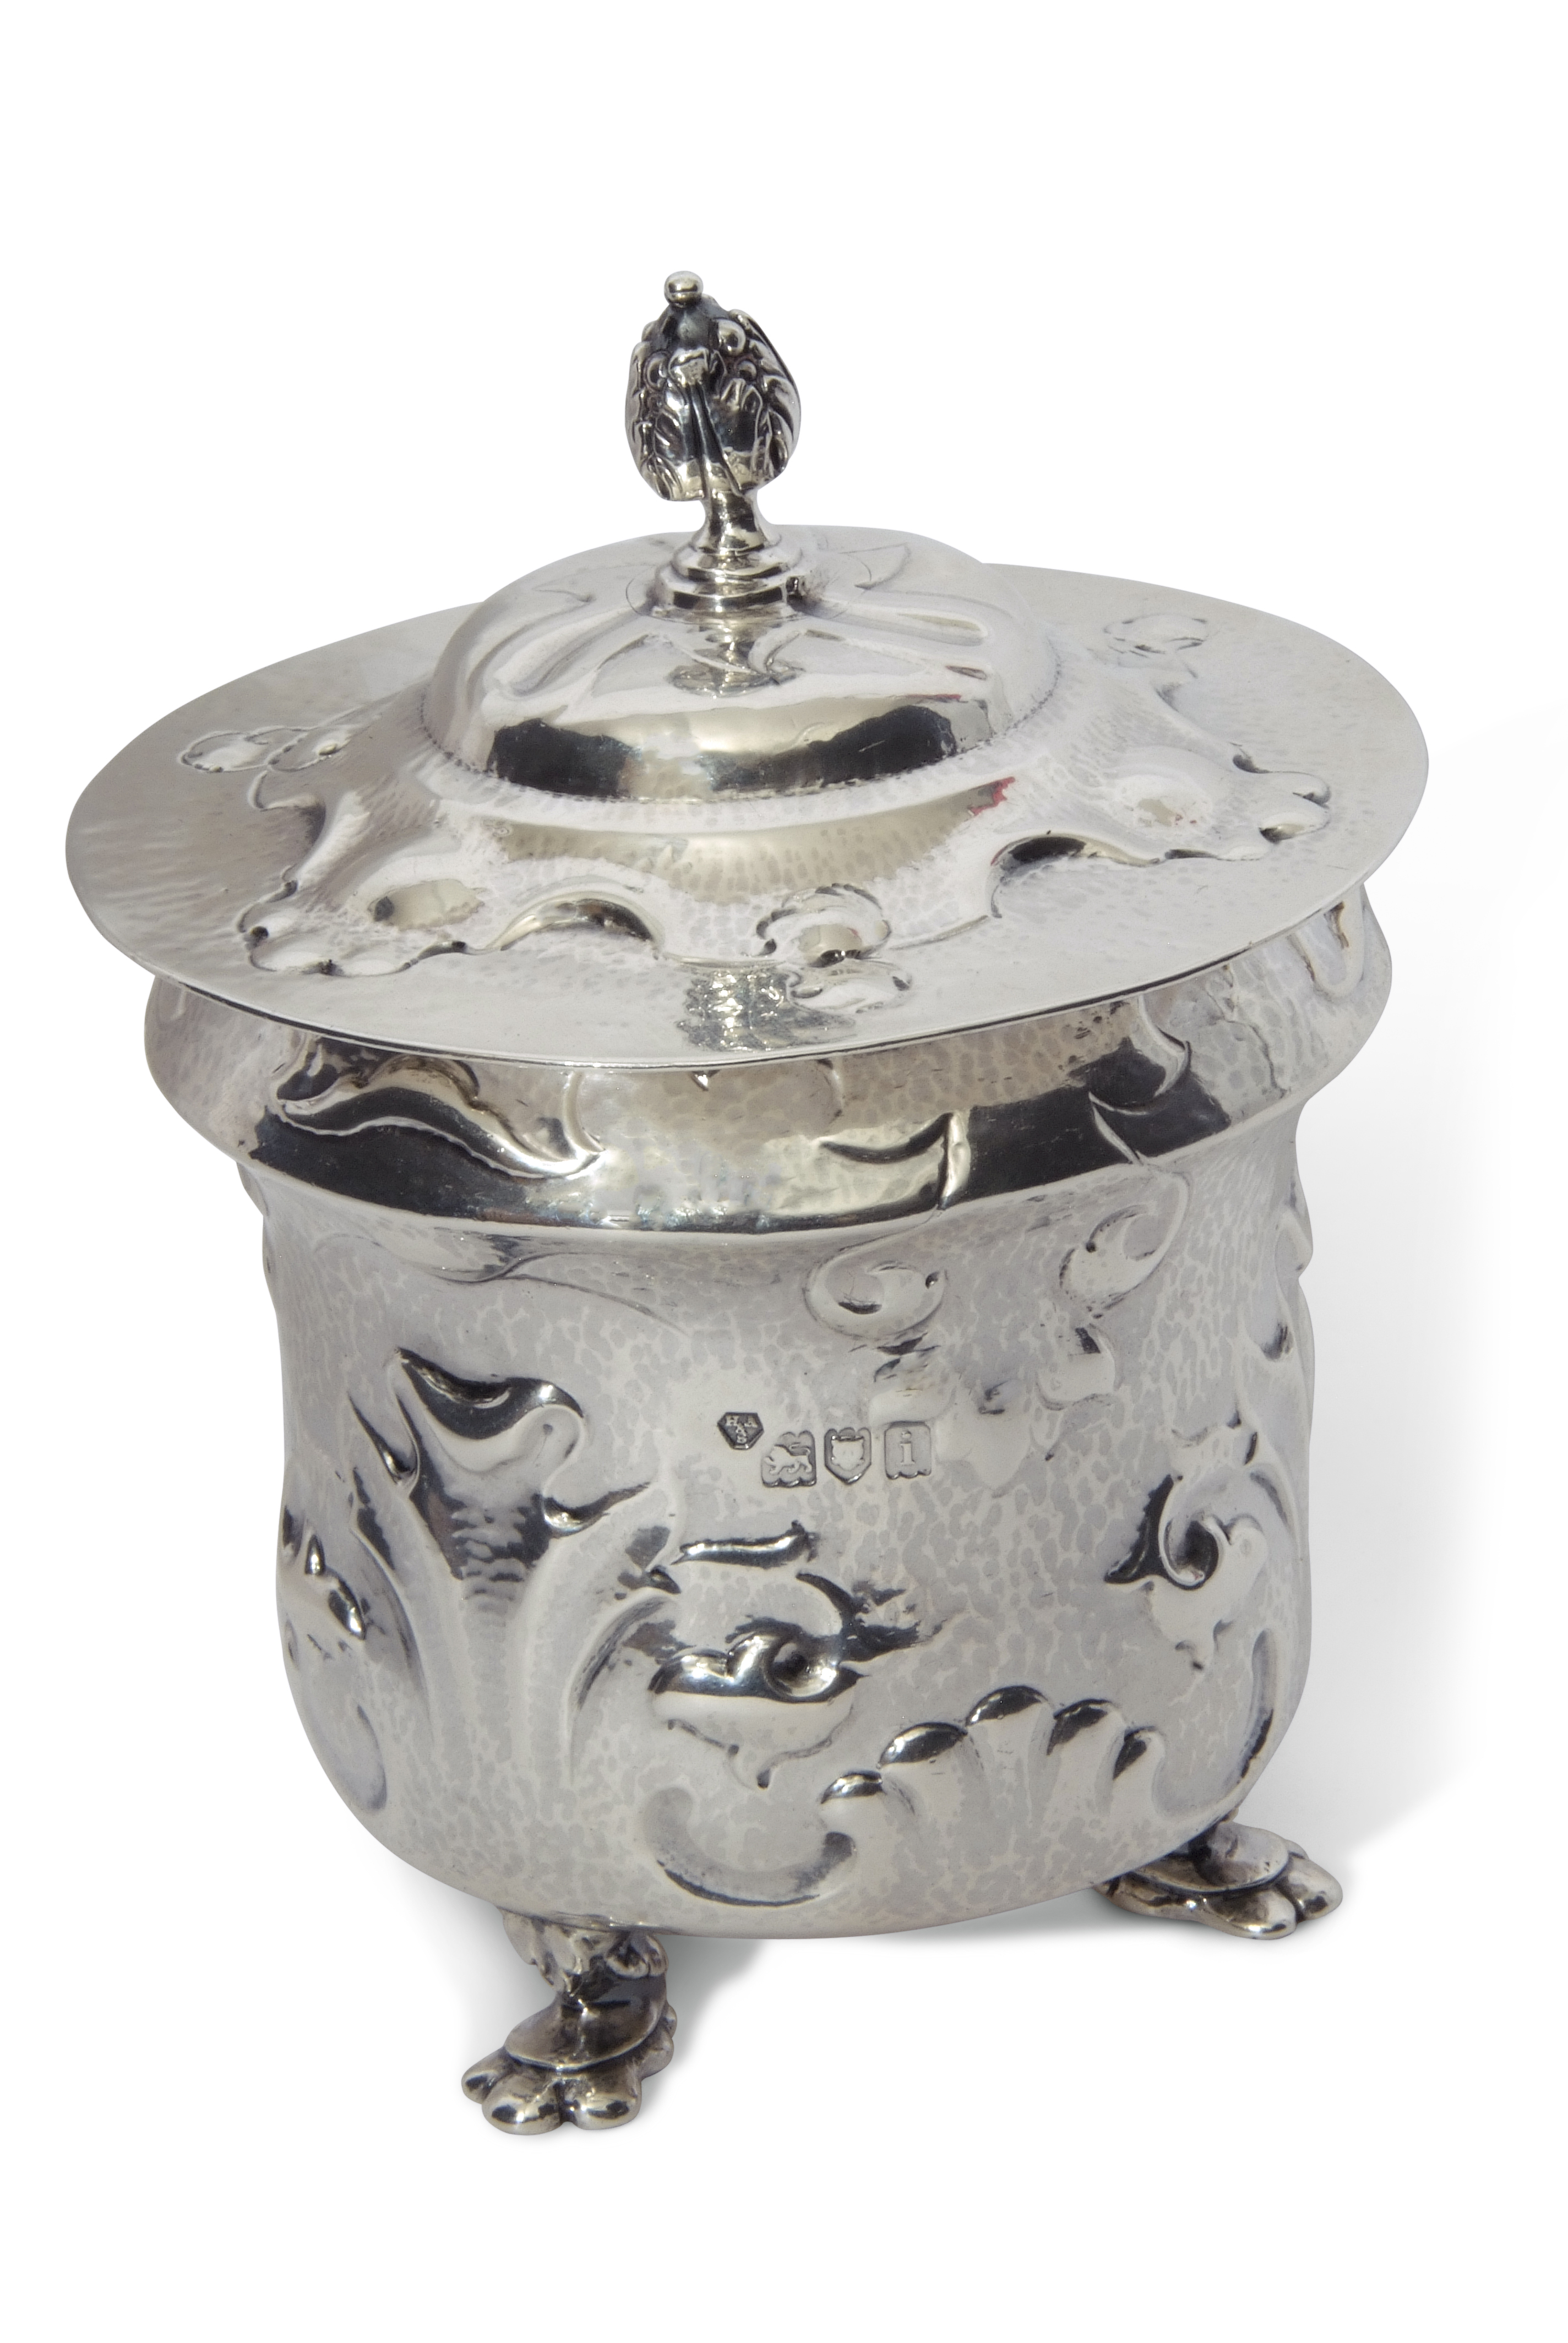 Art Nouveau silver tea caddy, the hammered body embellished with scrolling organic decoration and